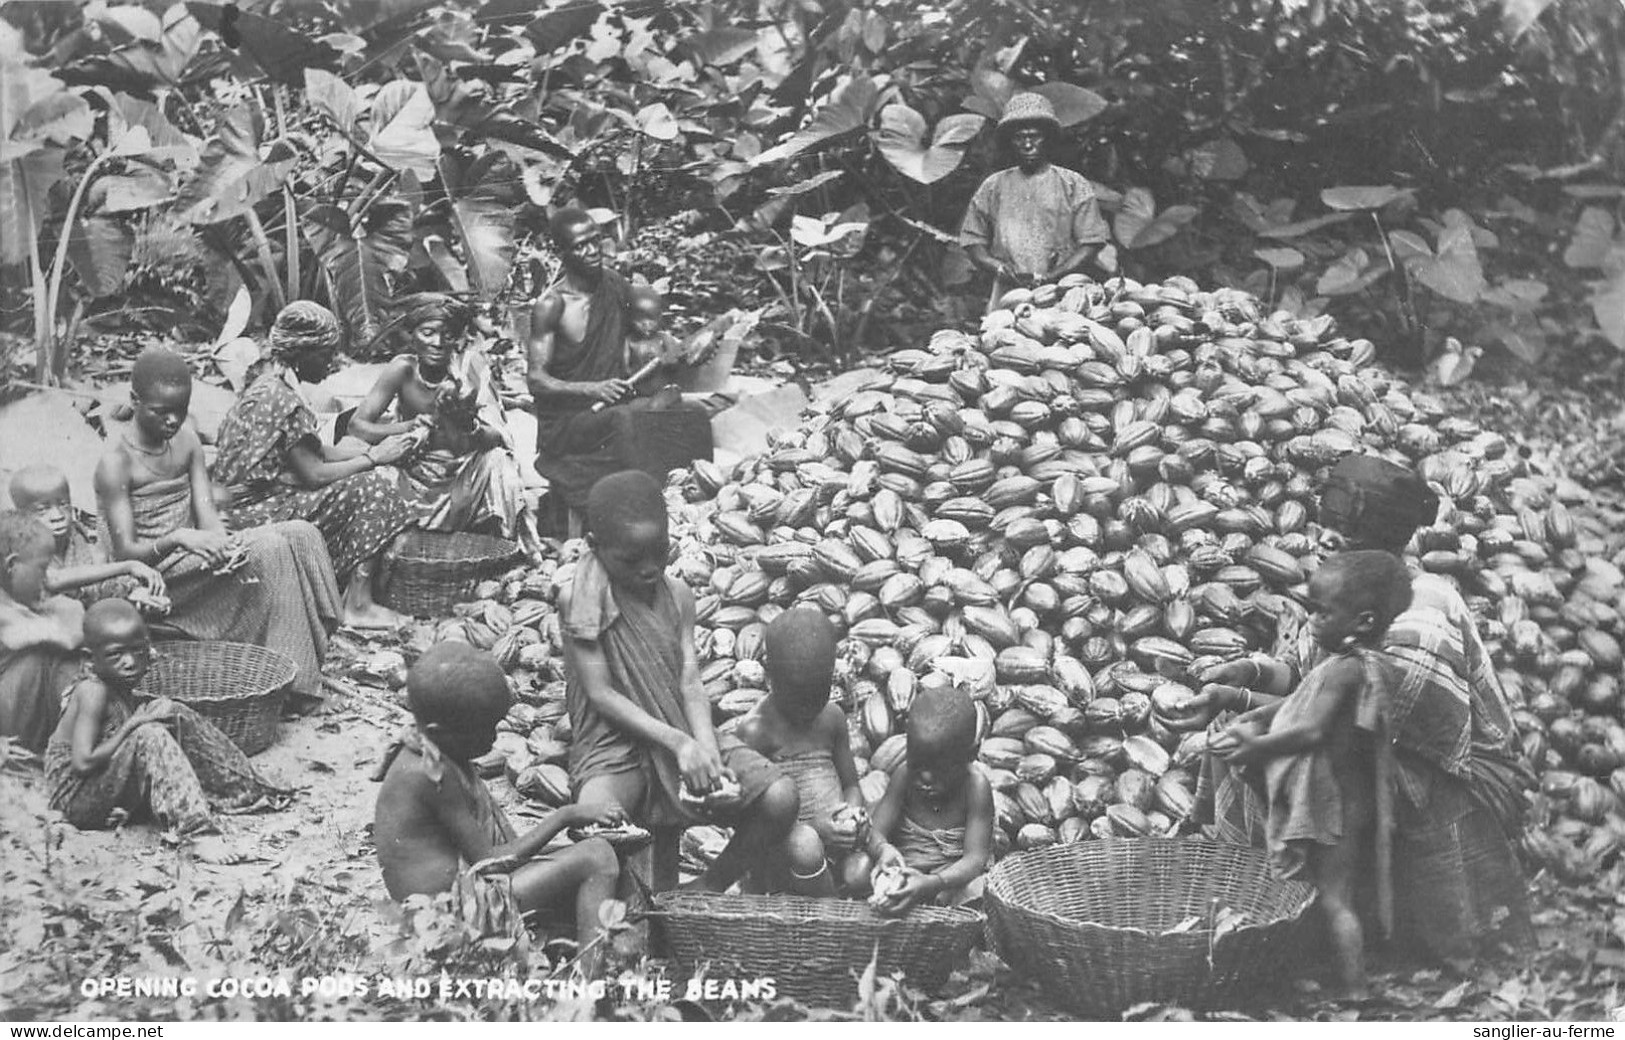 CPA ANTILLES / TRINIDAD / CARTE PHOTO / OPENING COCOA PODS AND EXTRACTING THE BEANS - Trinidad